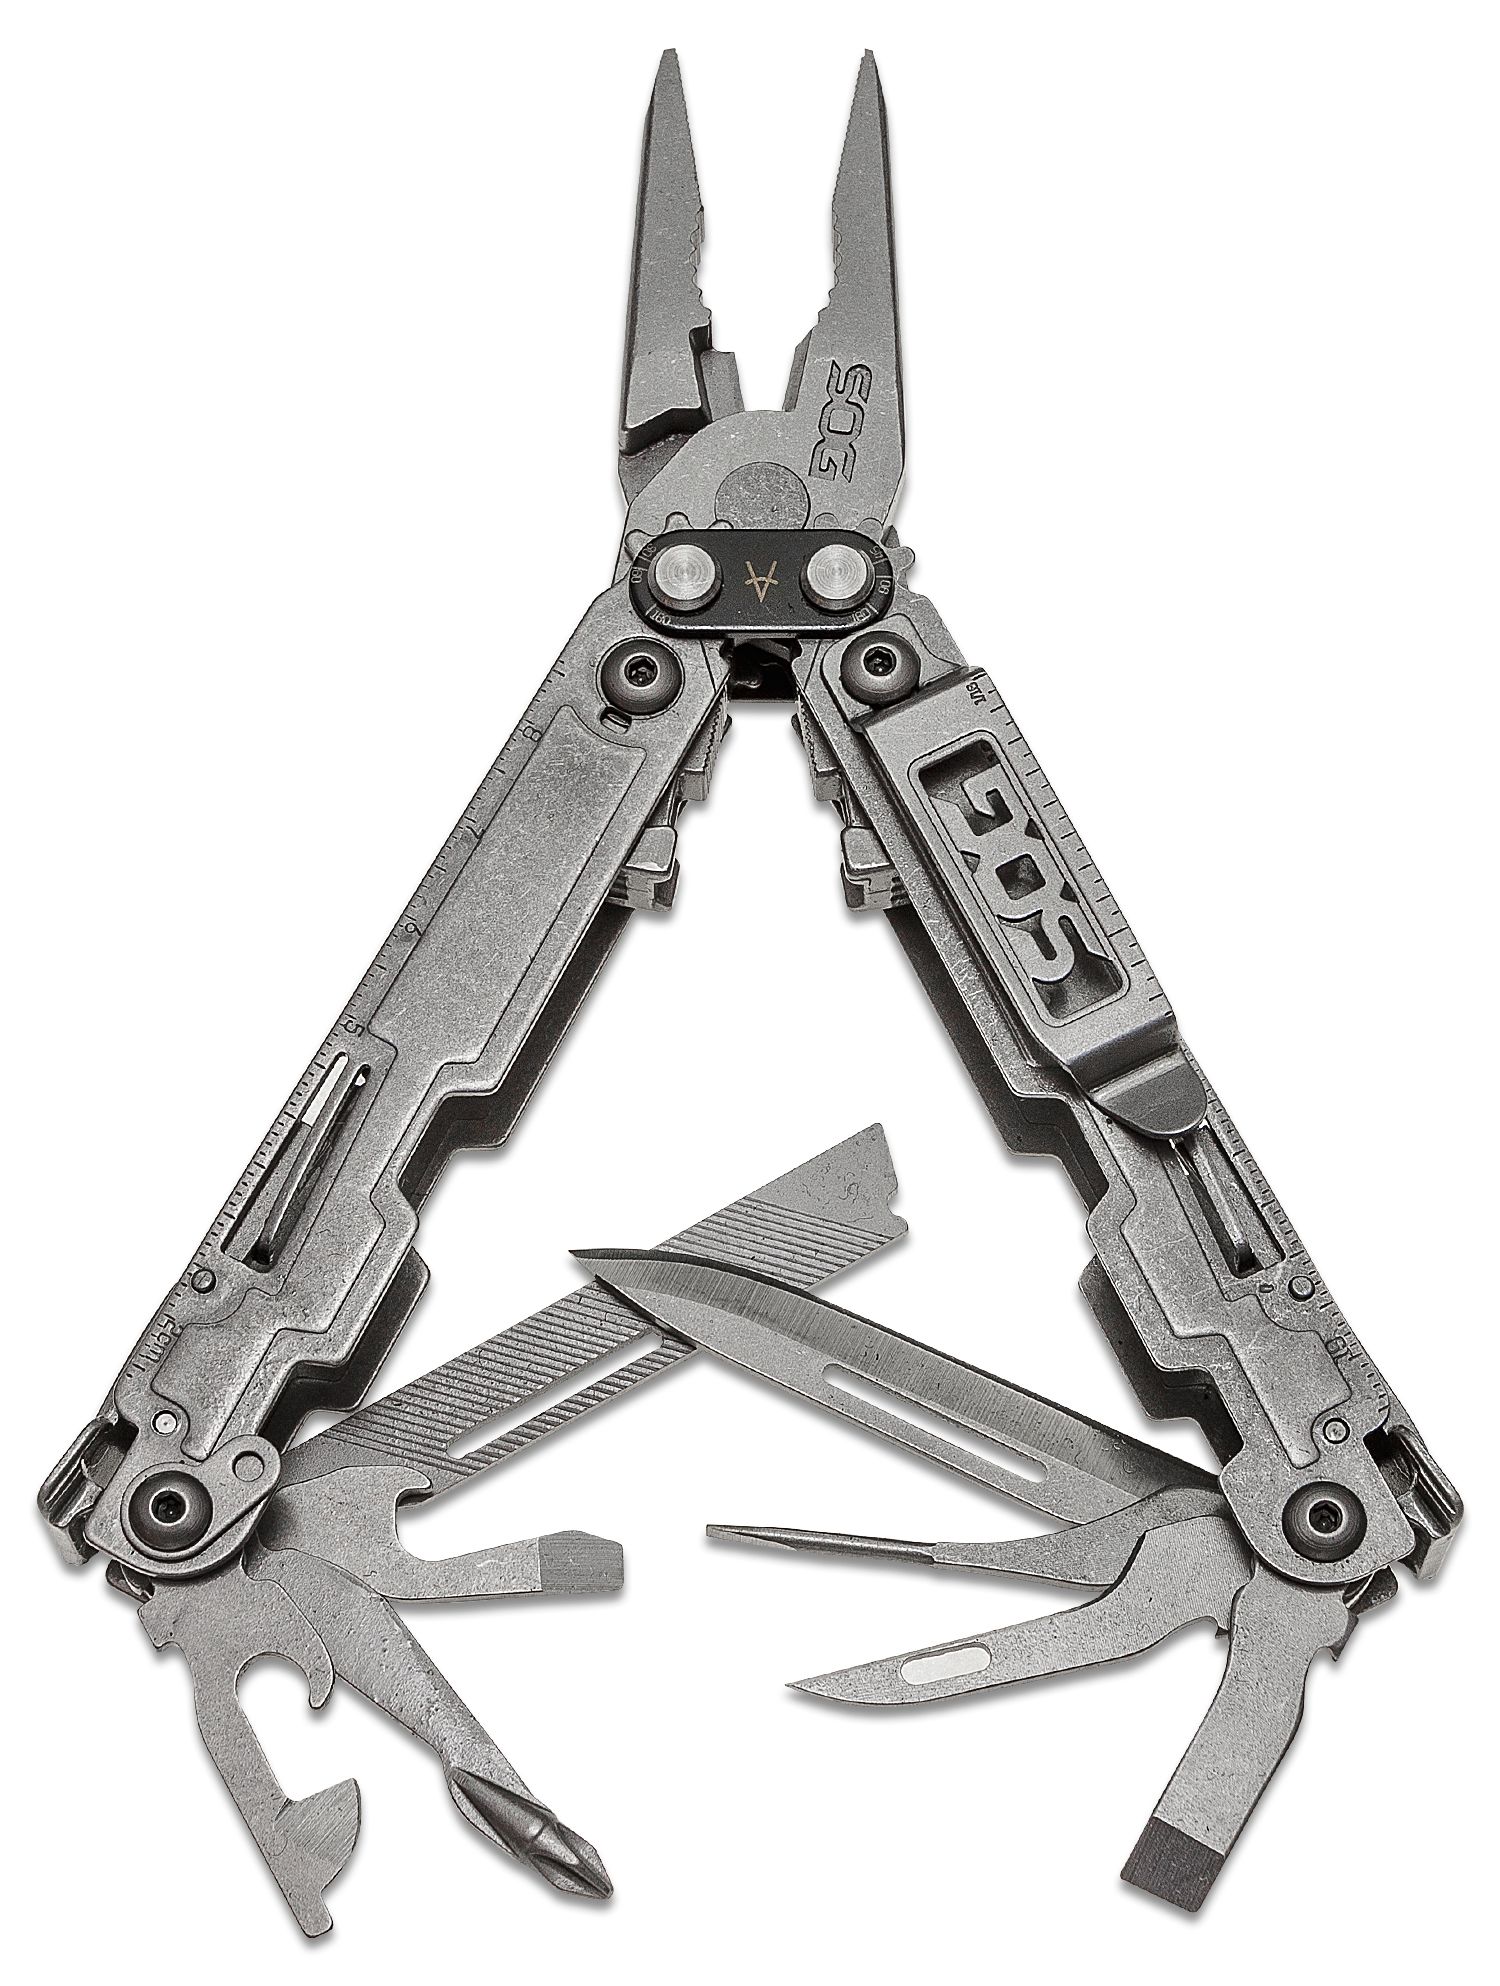 #3999 S66N-CP SOG MULTI-TOOL POWER ASSIST 16 tools combined Model 